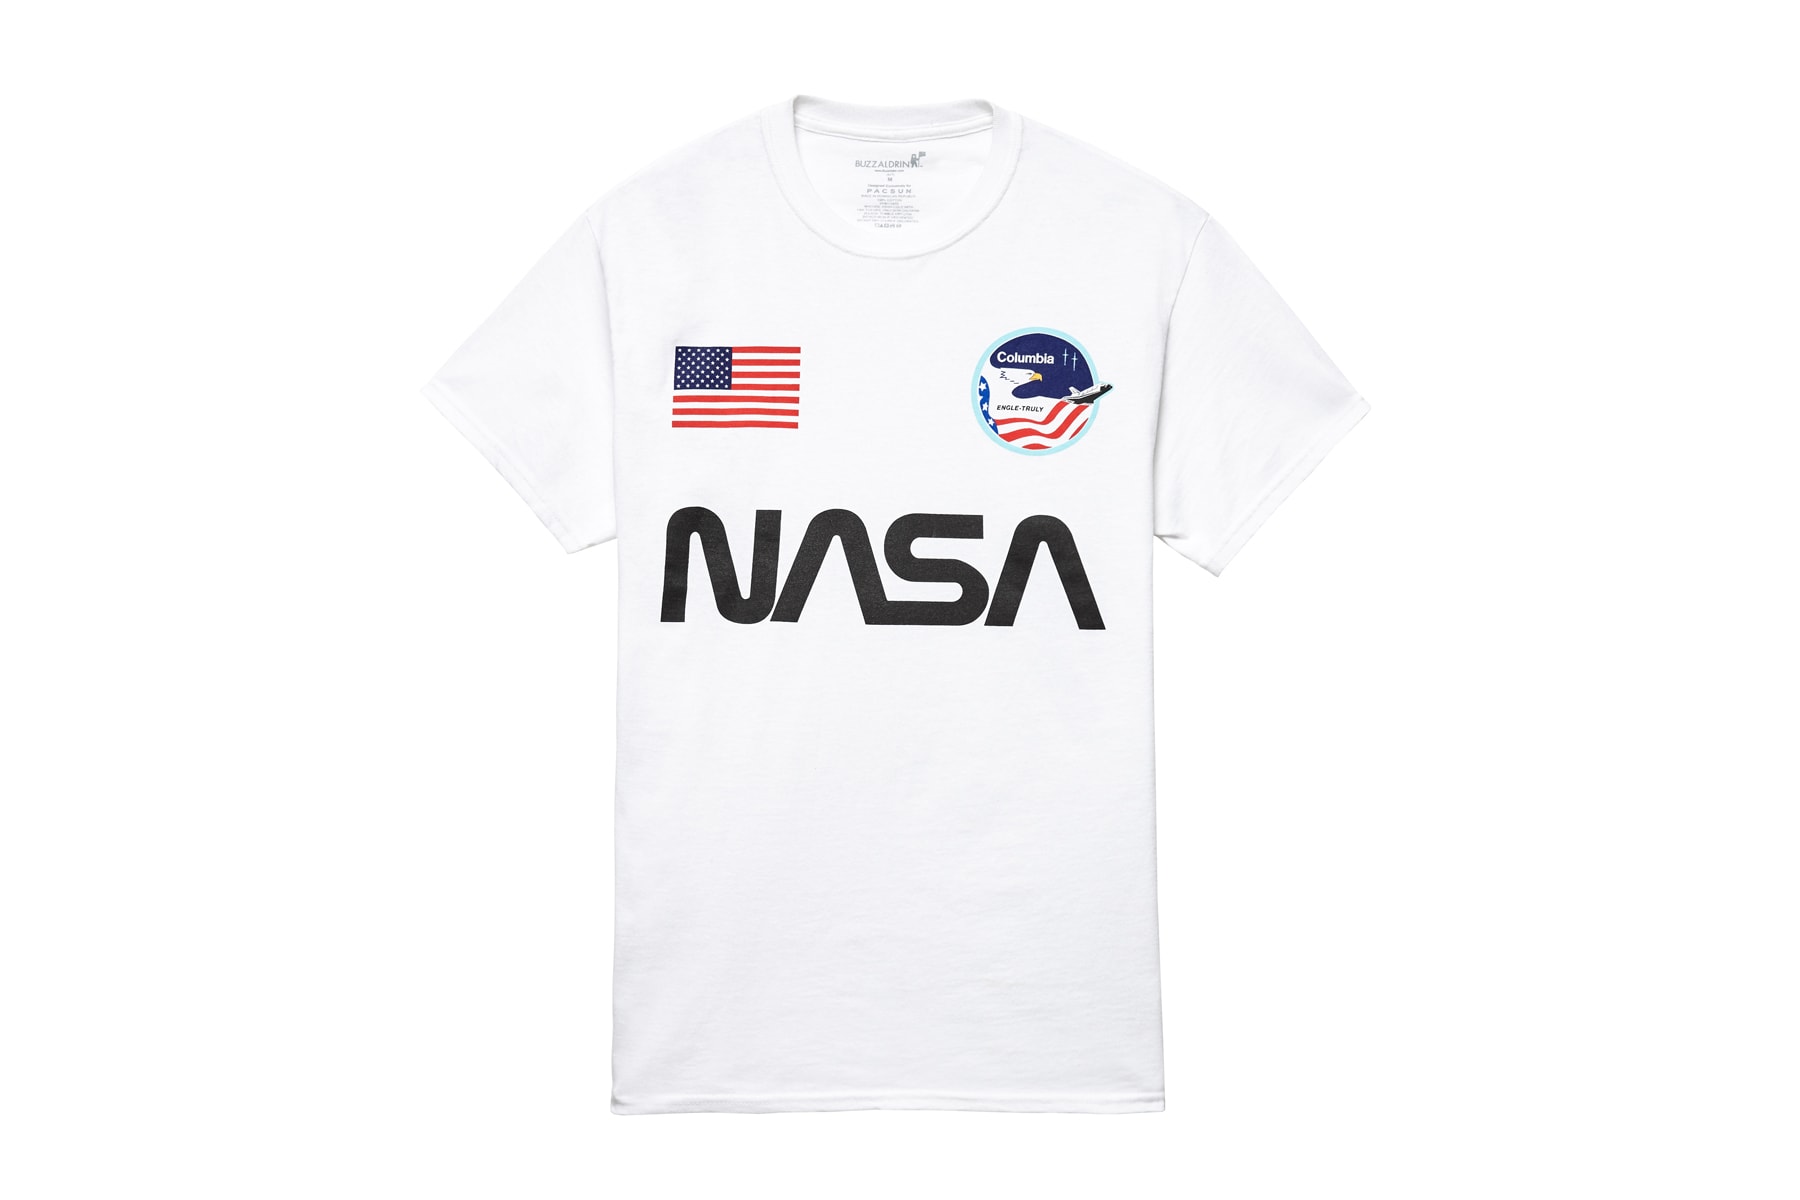 NASA x PacSun Holiday Capsule Collection | Hypebeast